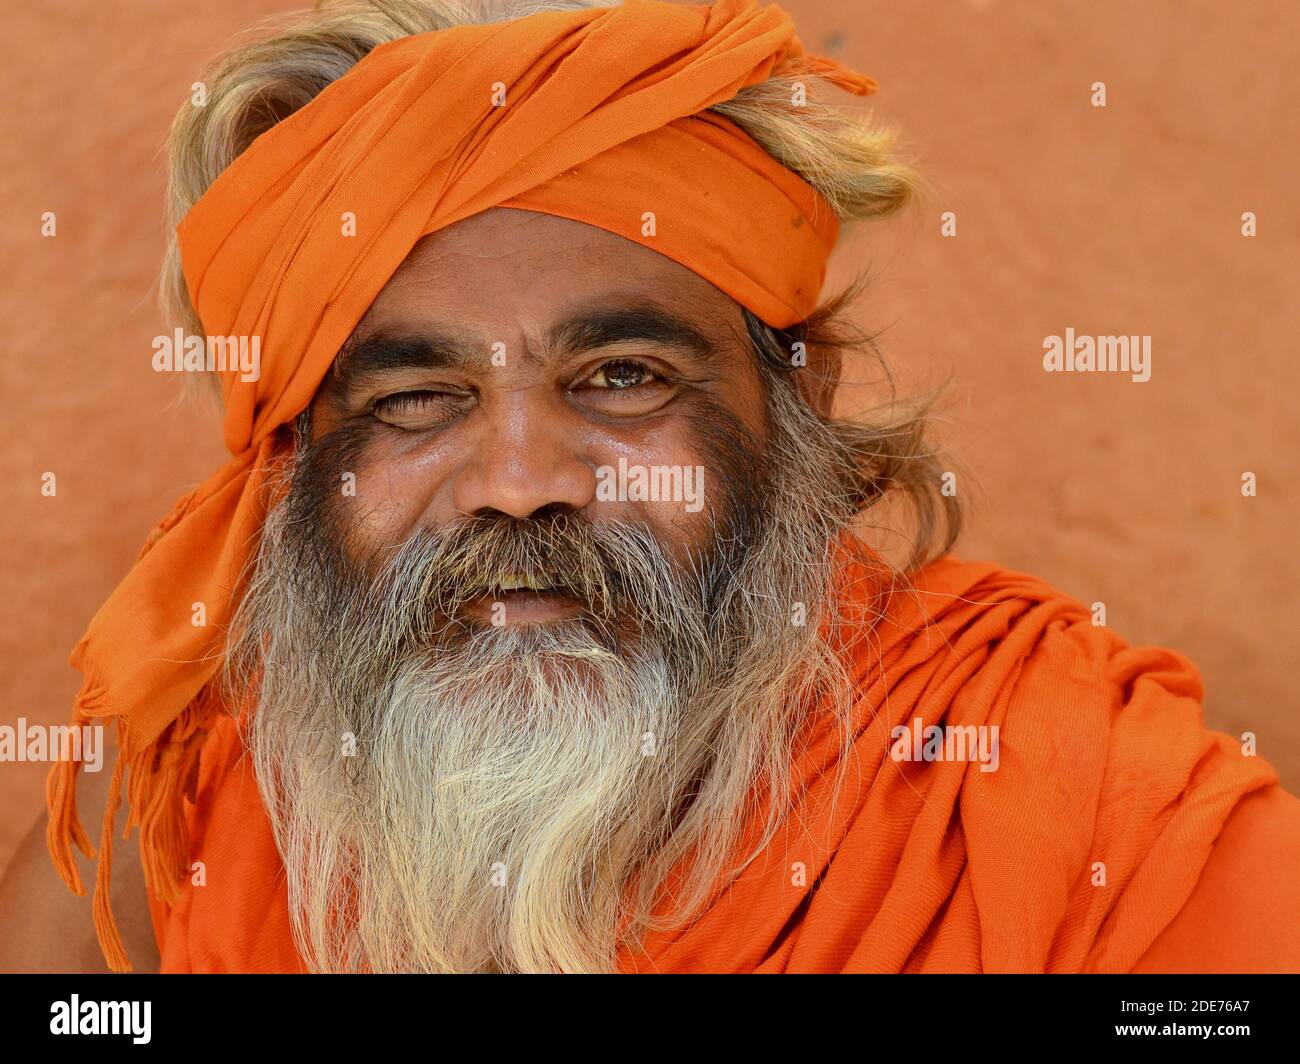 One-eyed elderly Indian Hindu holy man (sadhu, baba) with full beard, clad in orange, poses for the camera in front of a brown wall. Stock Photo